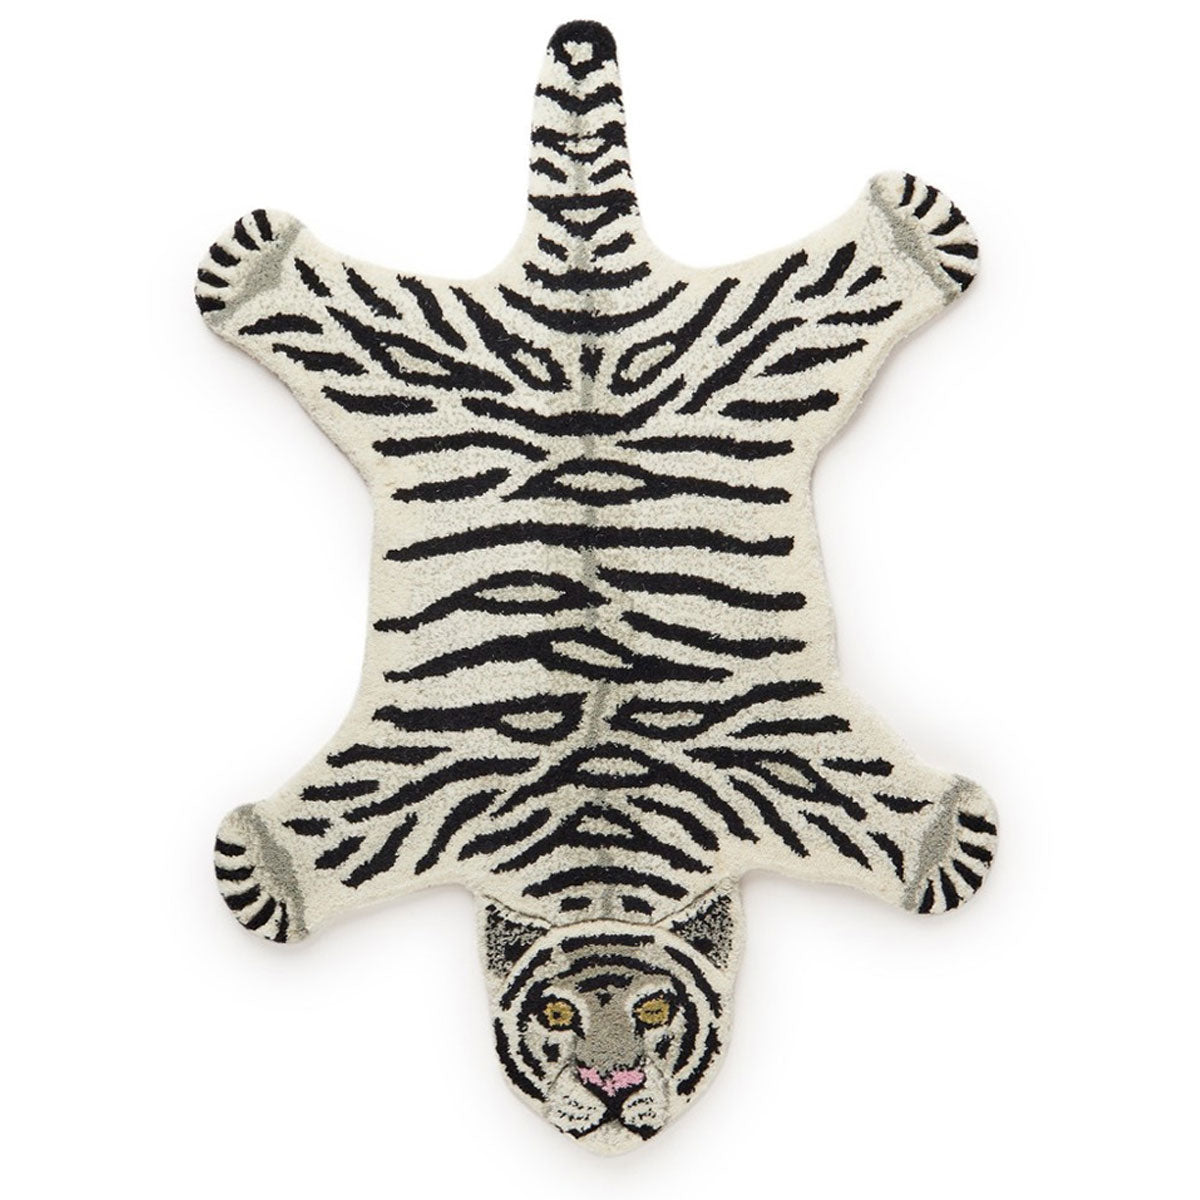 Snowy Tiger Rug Small - Doing Goods